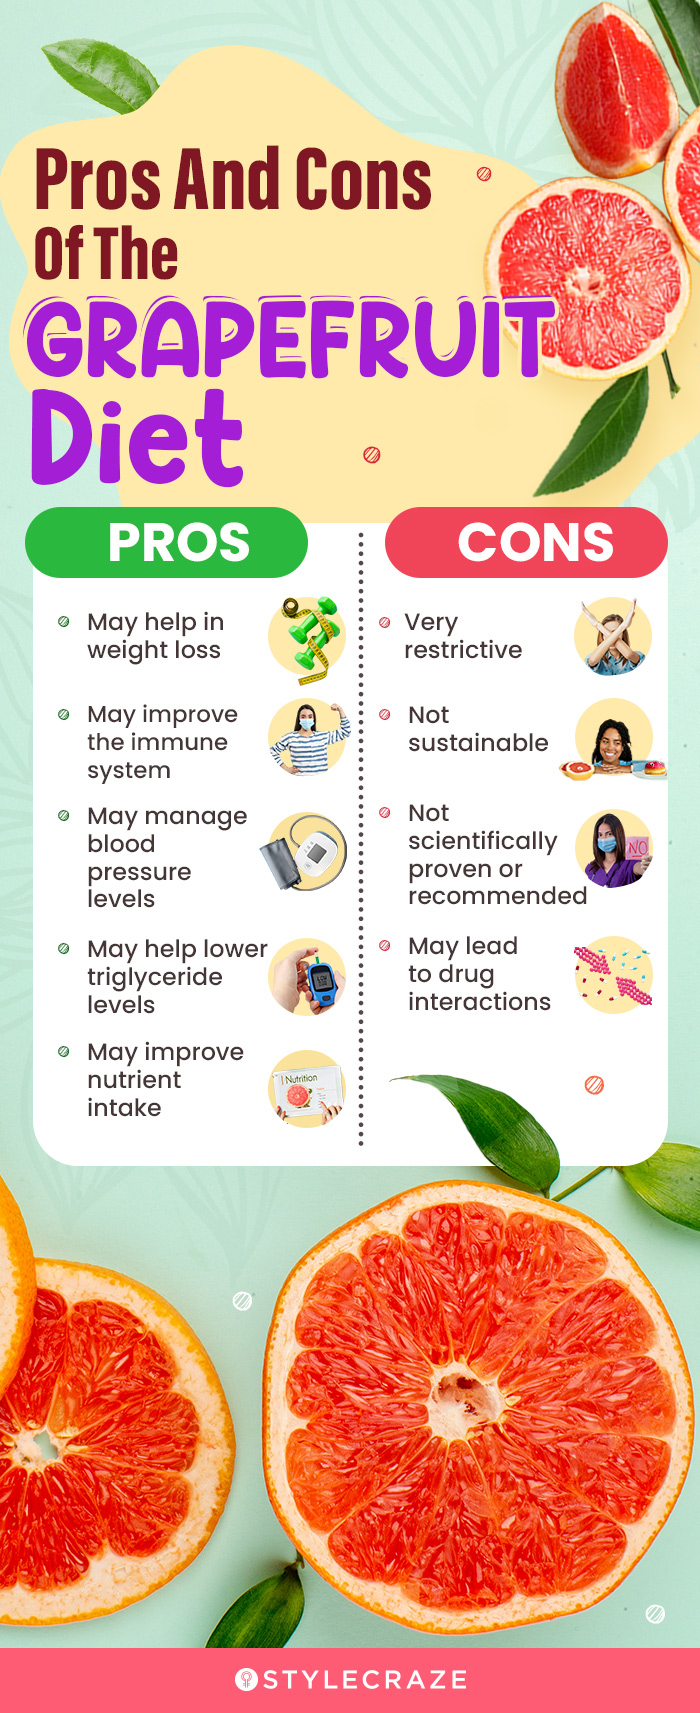 pros and cons of the grapefruit diet (infographic)